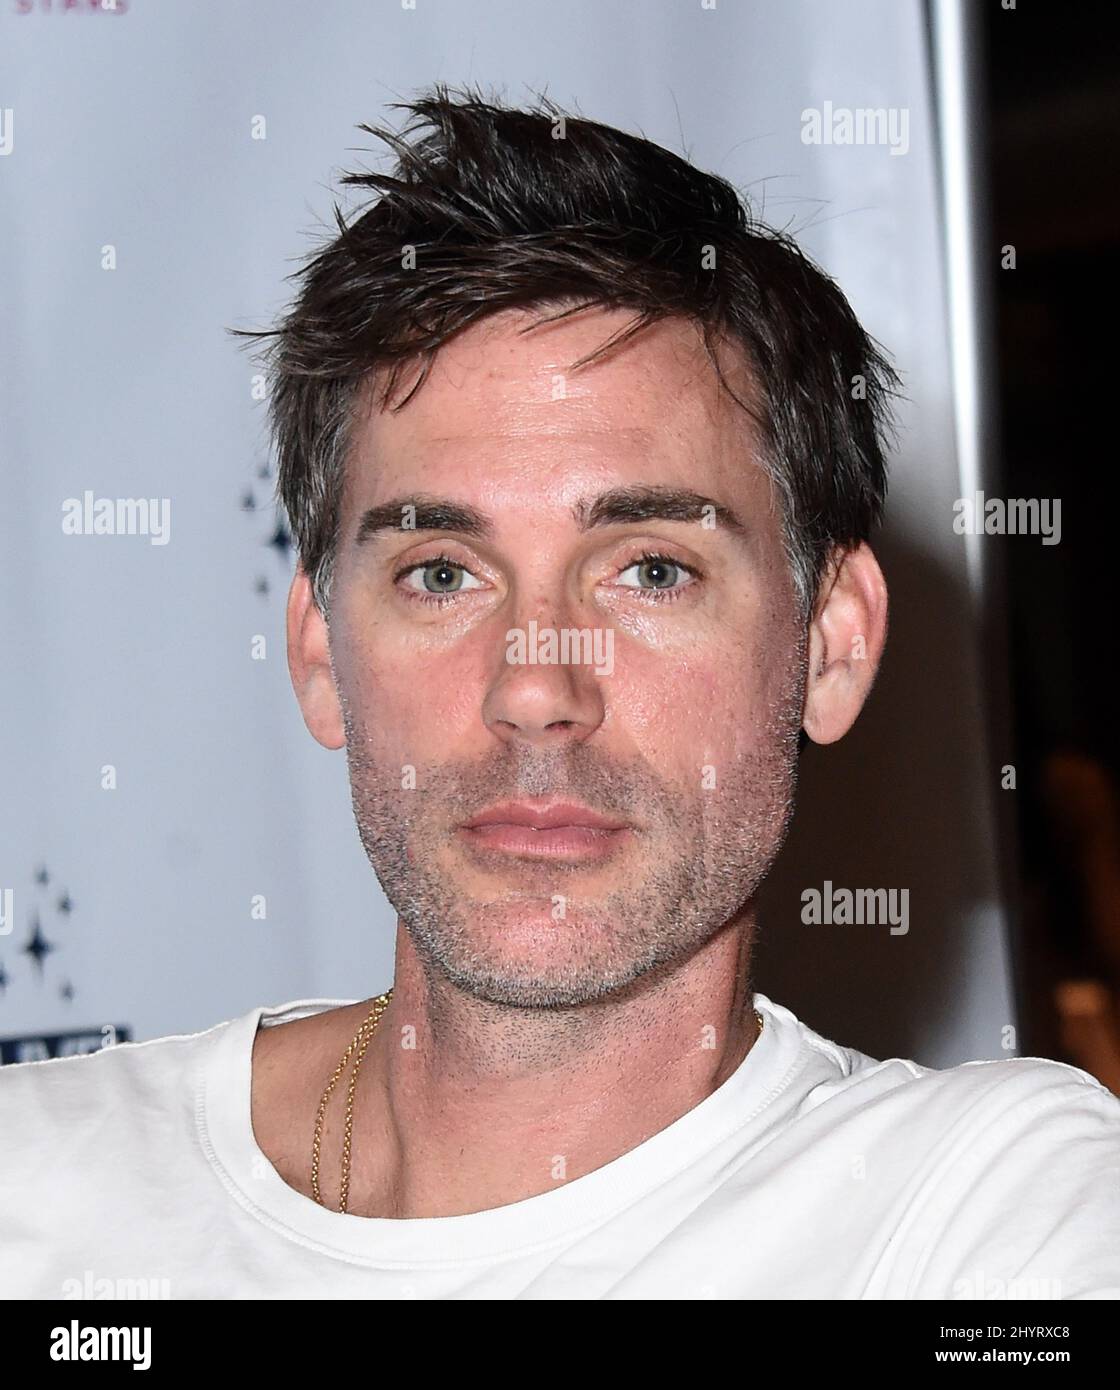 Drew Fuller on the second day of RomaDrama LIVE! Fan Convention held at The Factory at Franklin on July 31, 2021 in Franklin, TN. Stock Photo